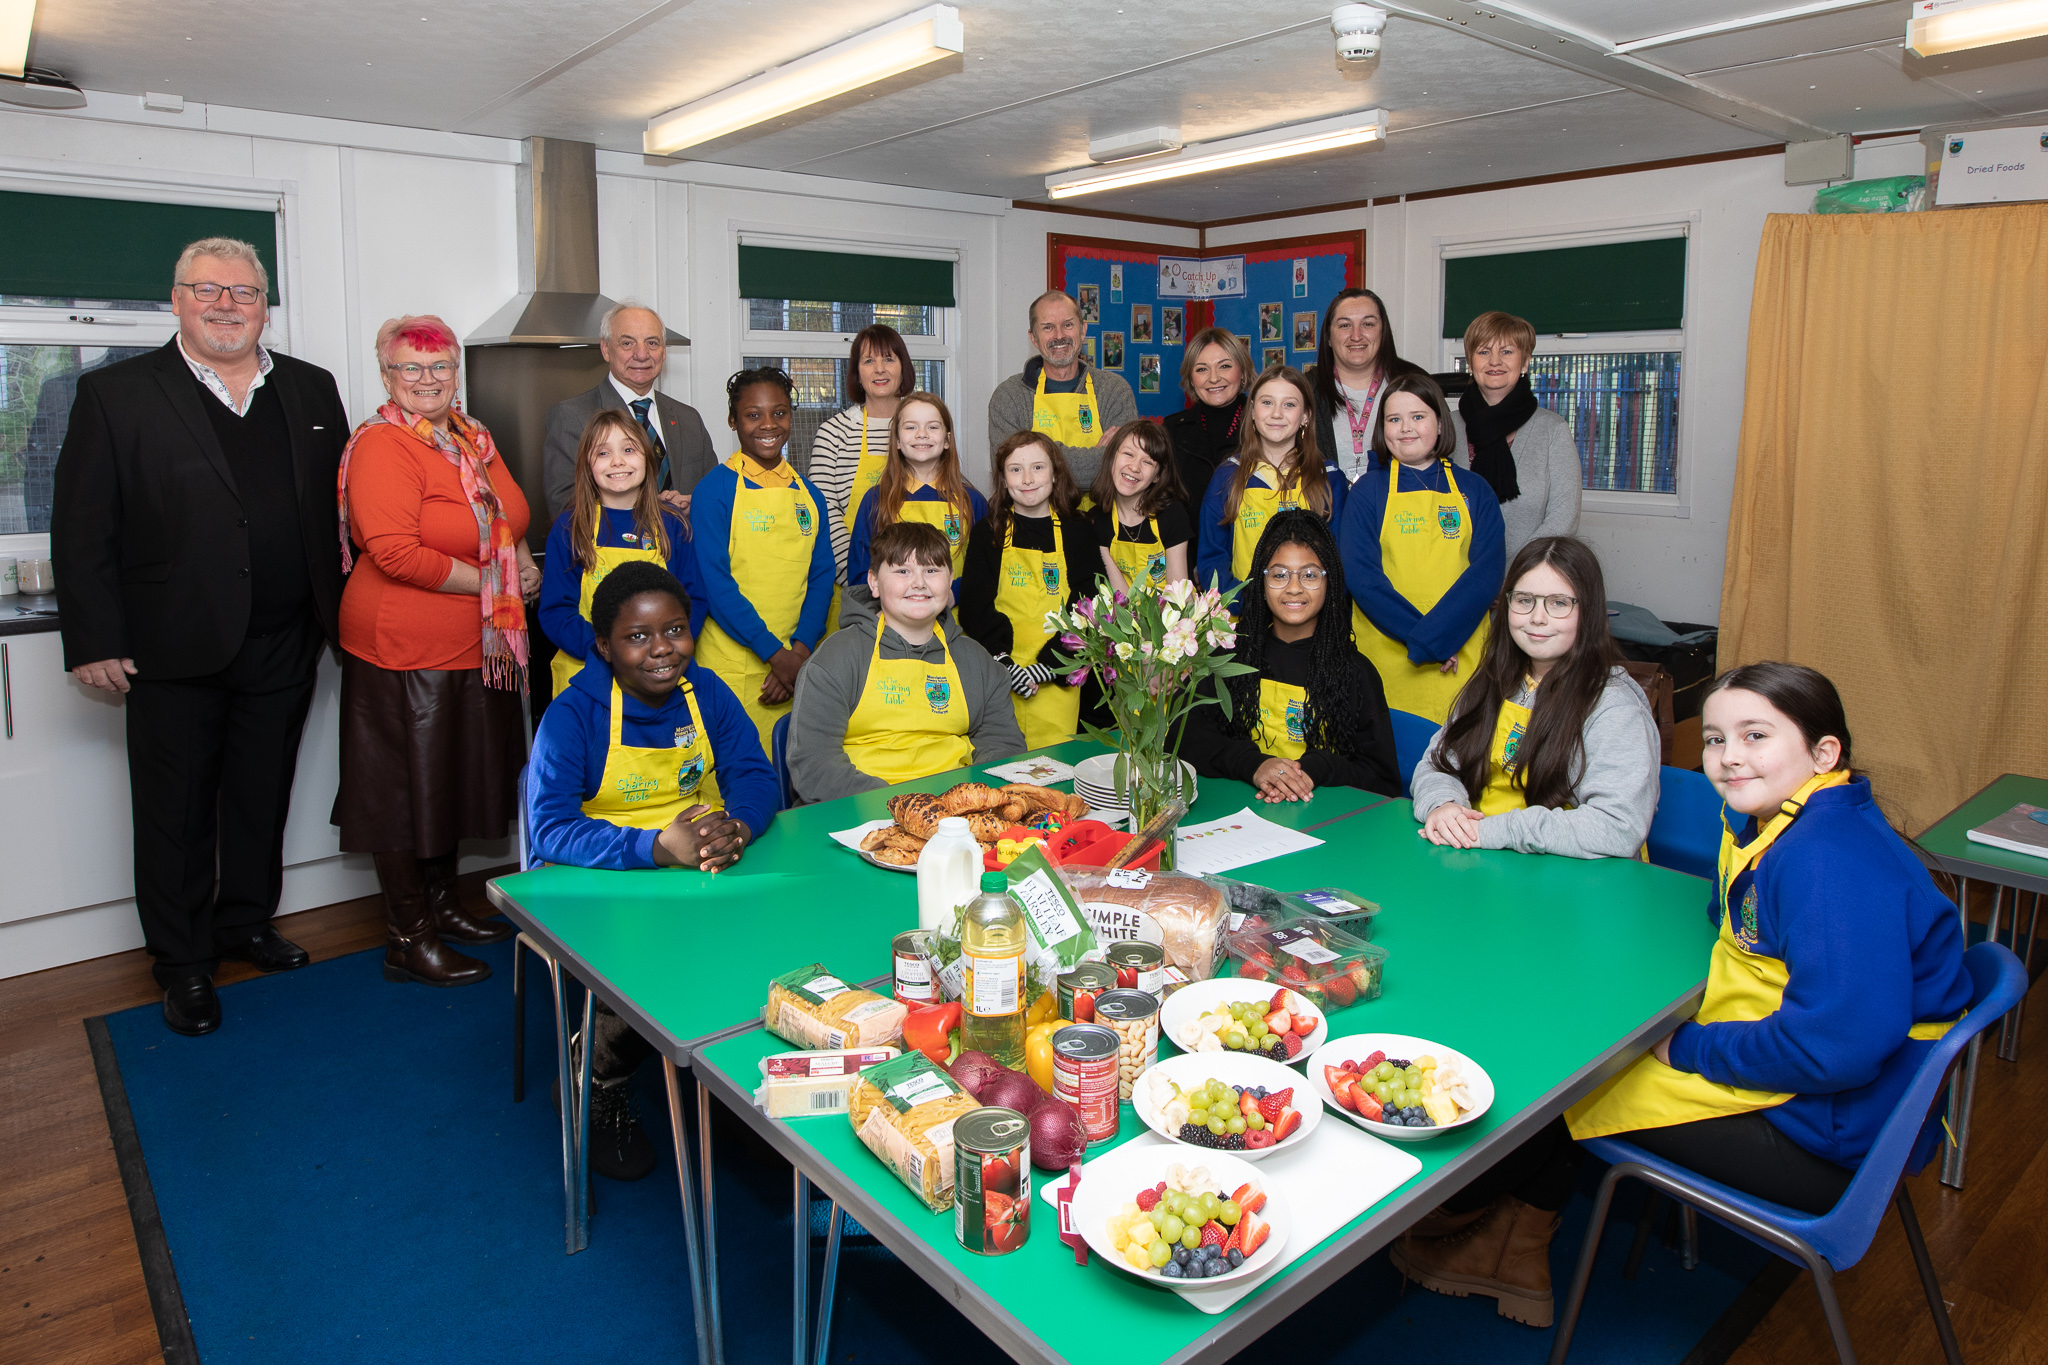 Peter Lynn, Carolyn Harris MP, Mike Hedges SM, Sian Brooks and Andrew Copson from The Sharing Table with pupils and staff from Morriston Primary School.